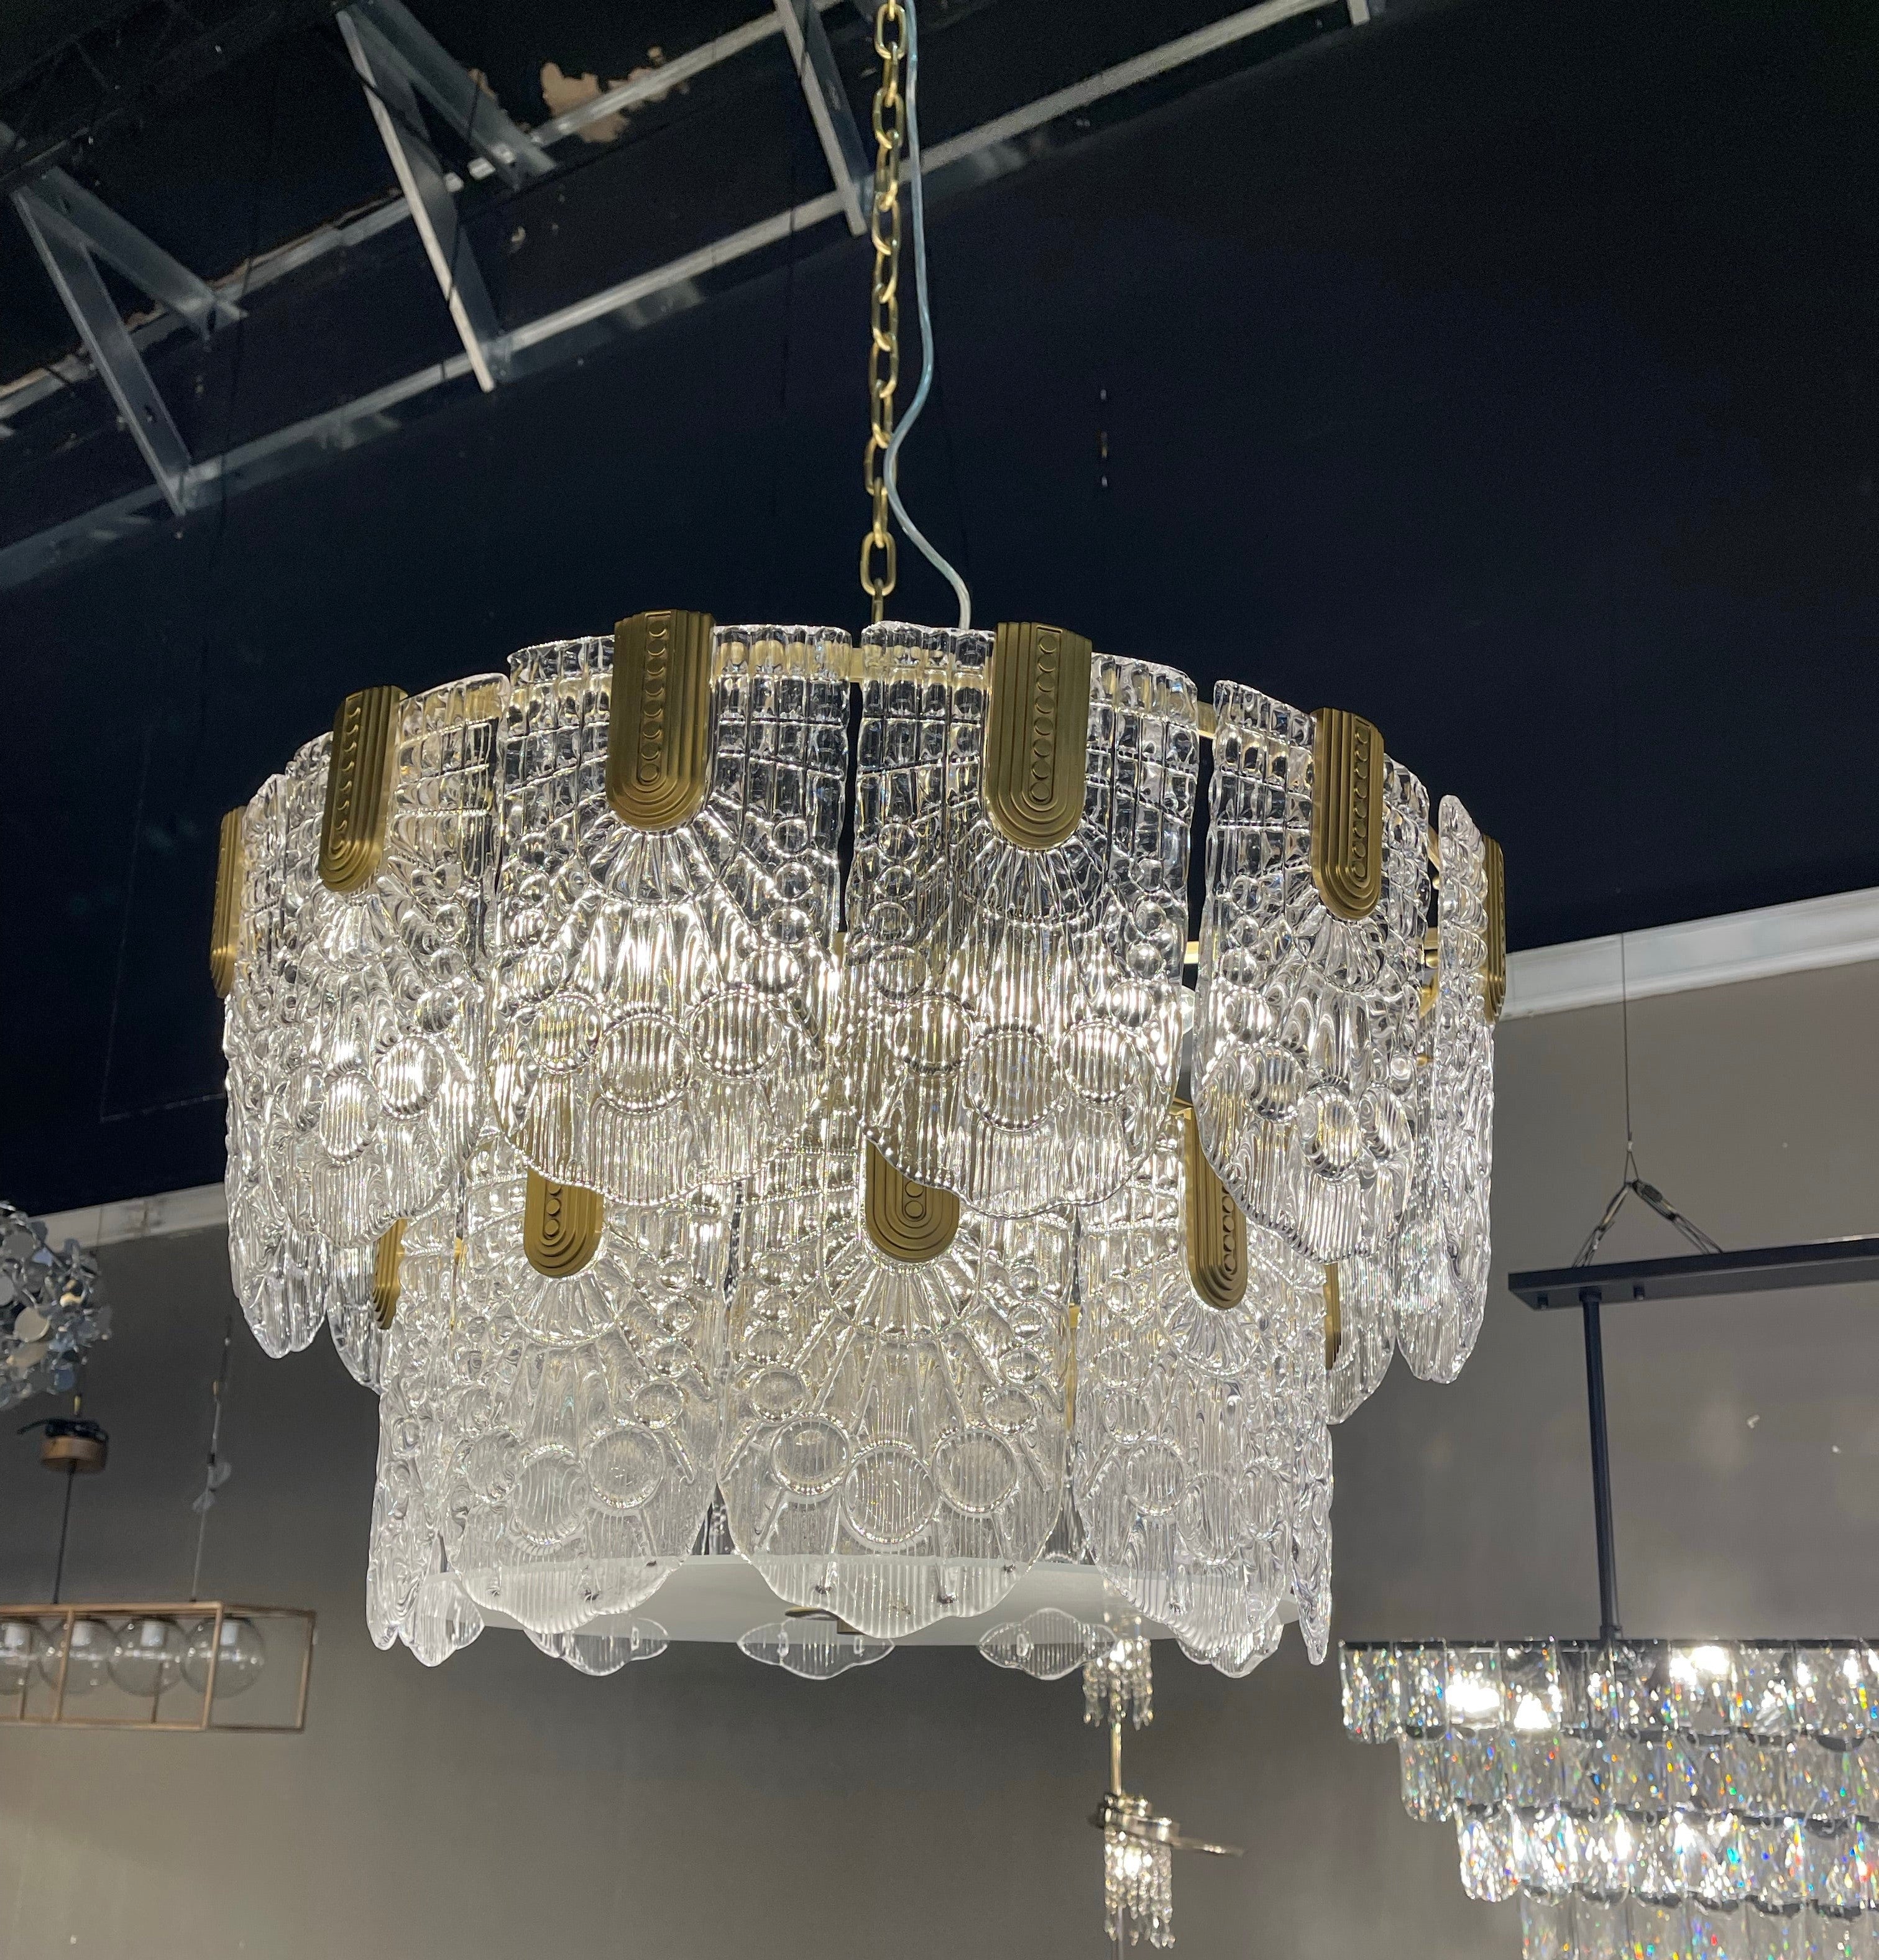 Jacques Brass Crystal Round Chandelier - Italian Concept